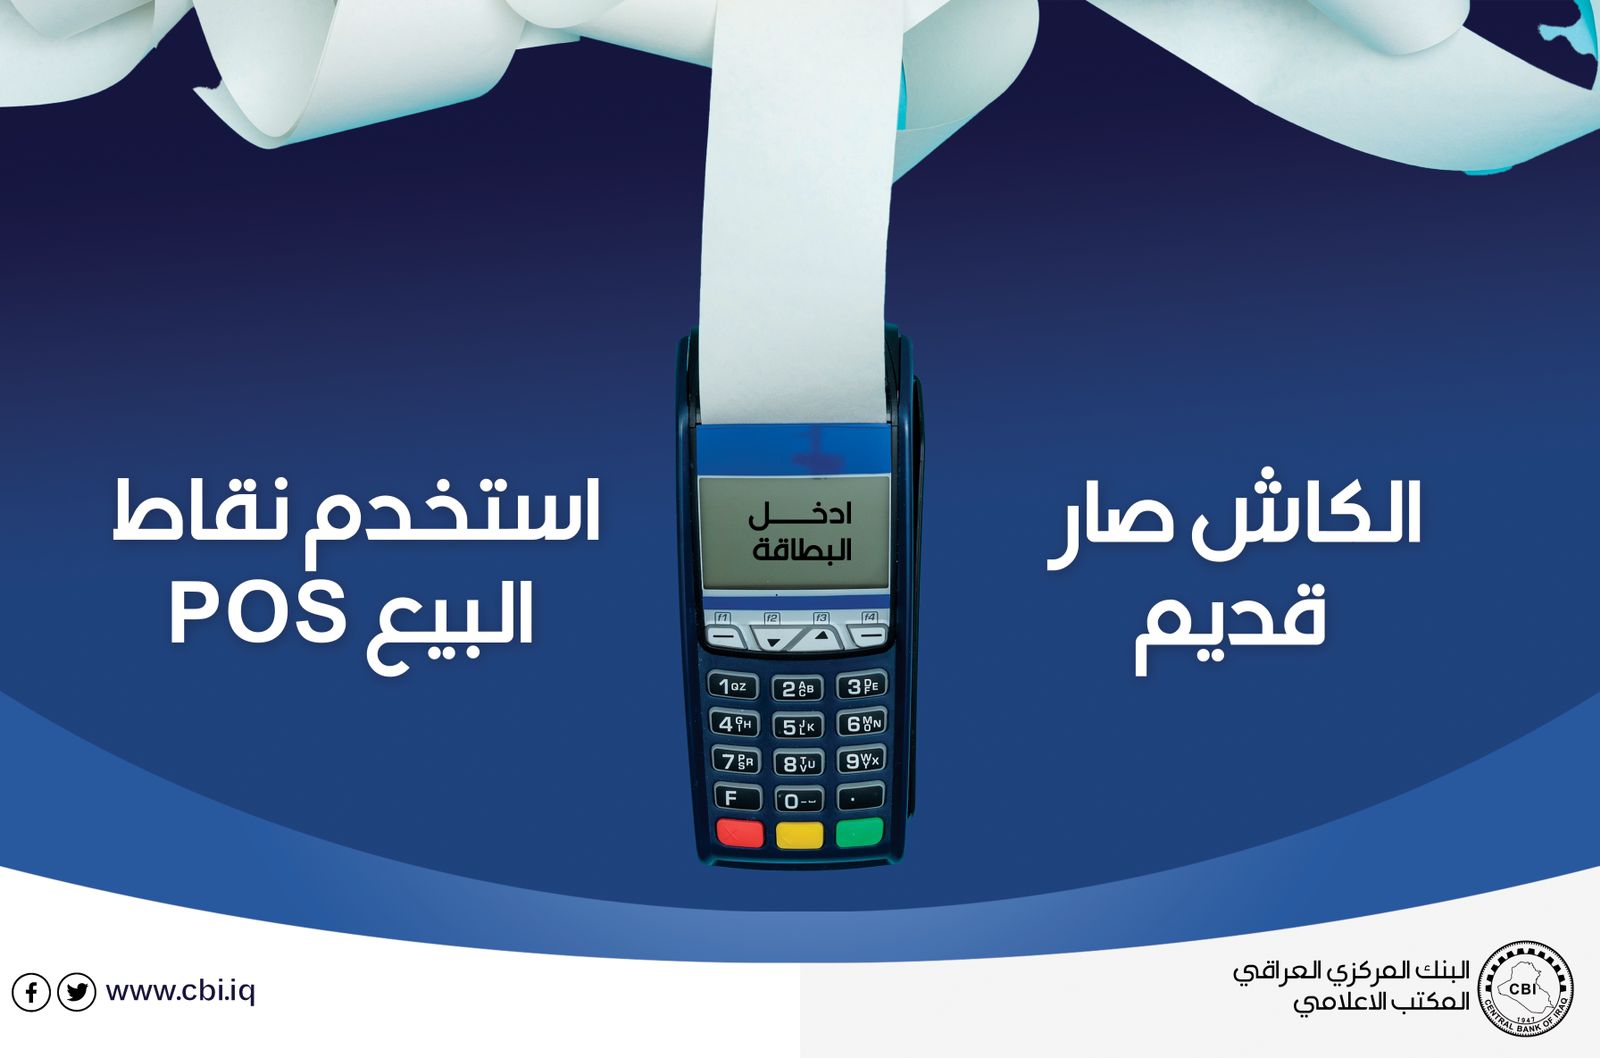 CBI promotes the use of payment devices (POS) in accordance with the decision of the Council of Ministers